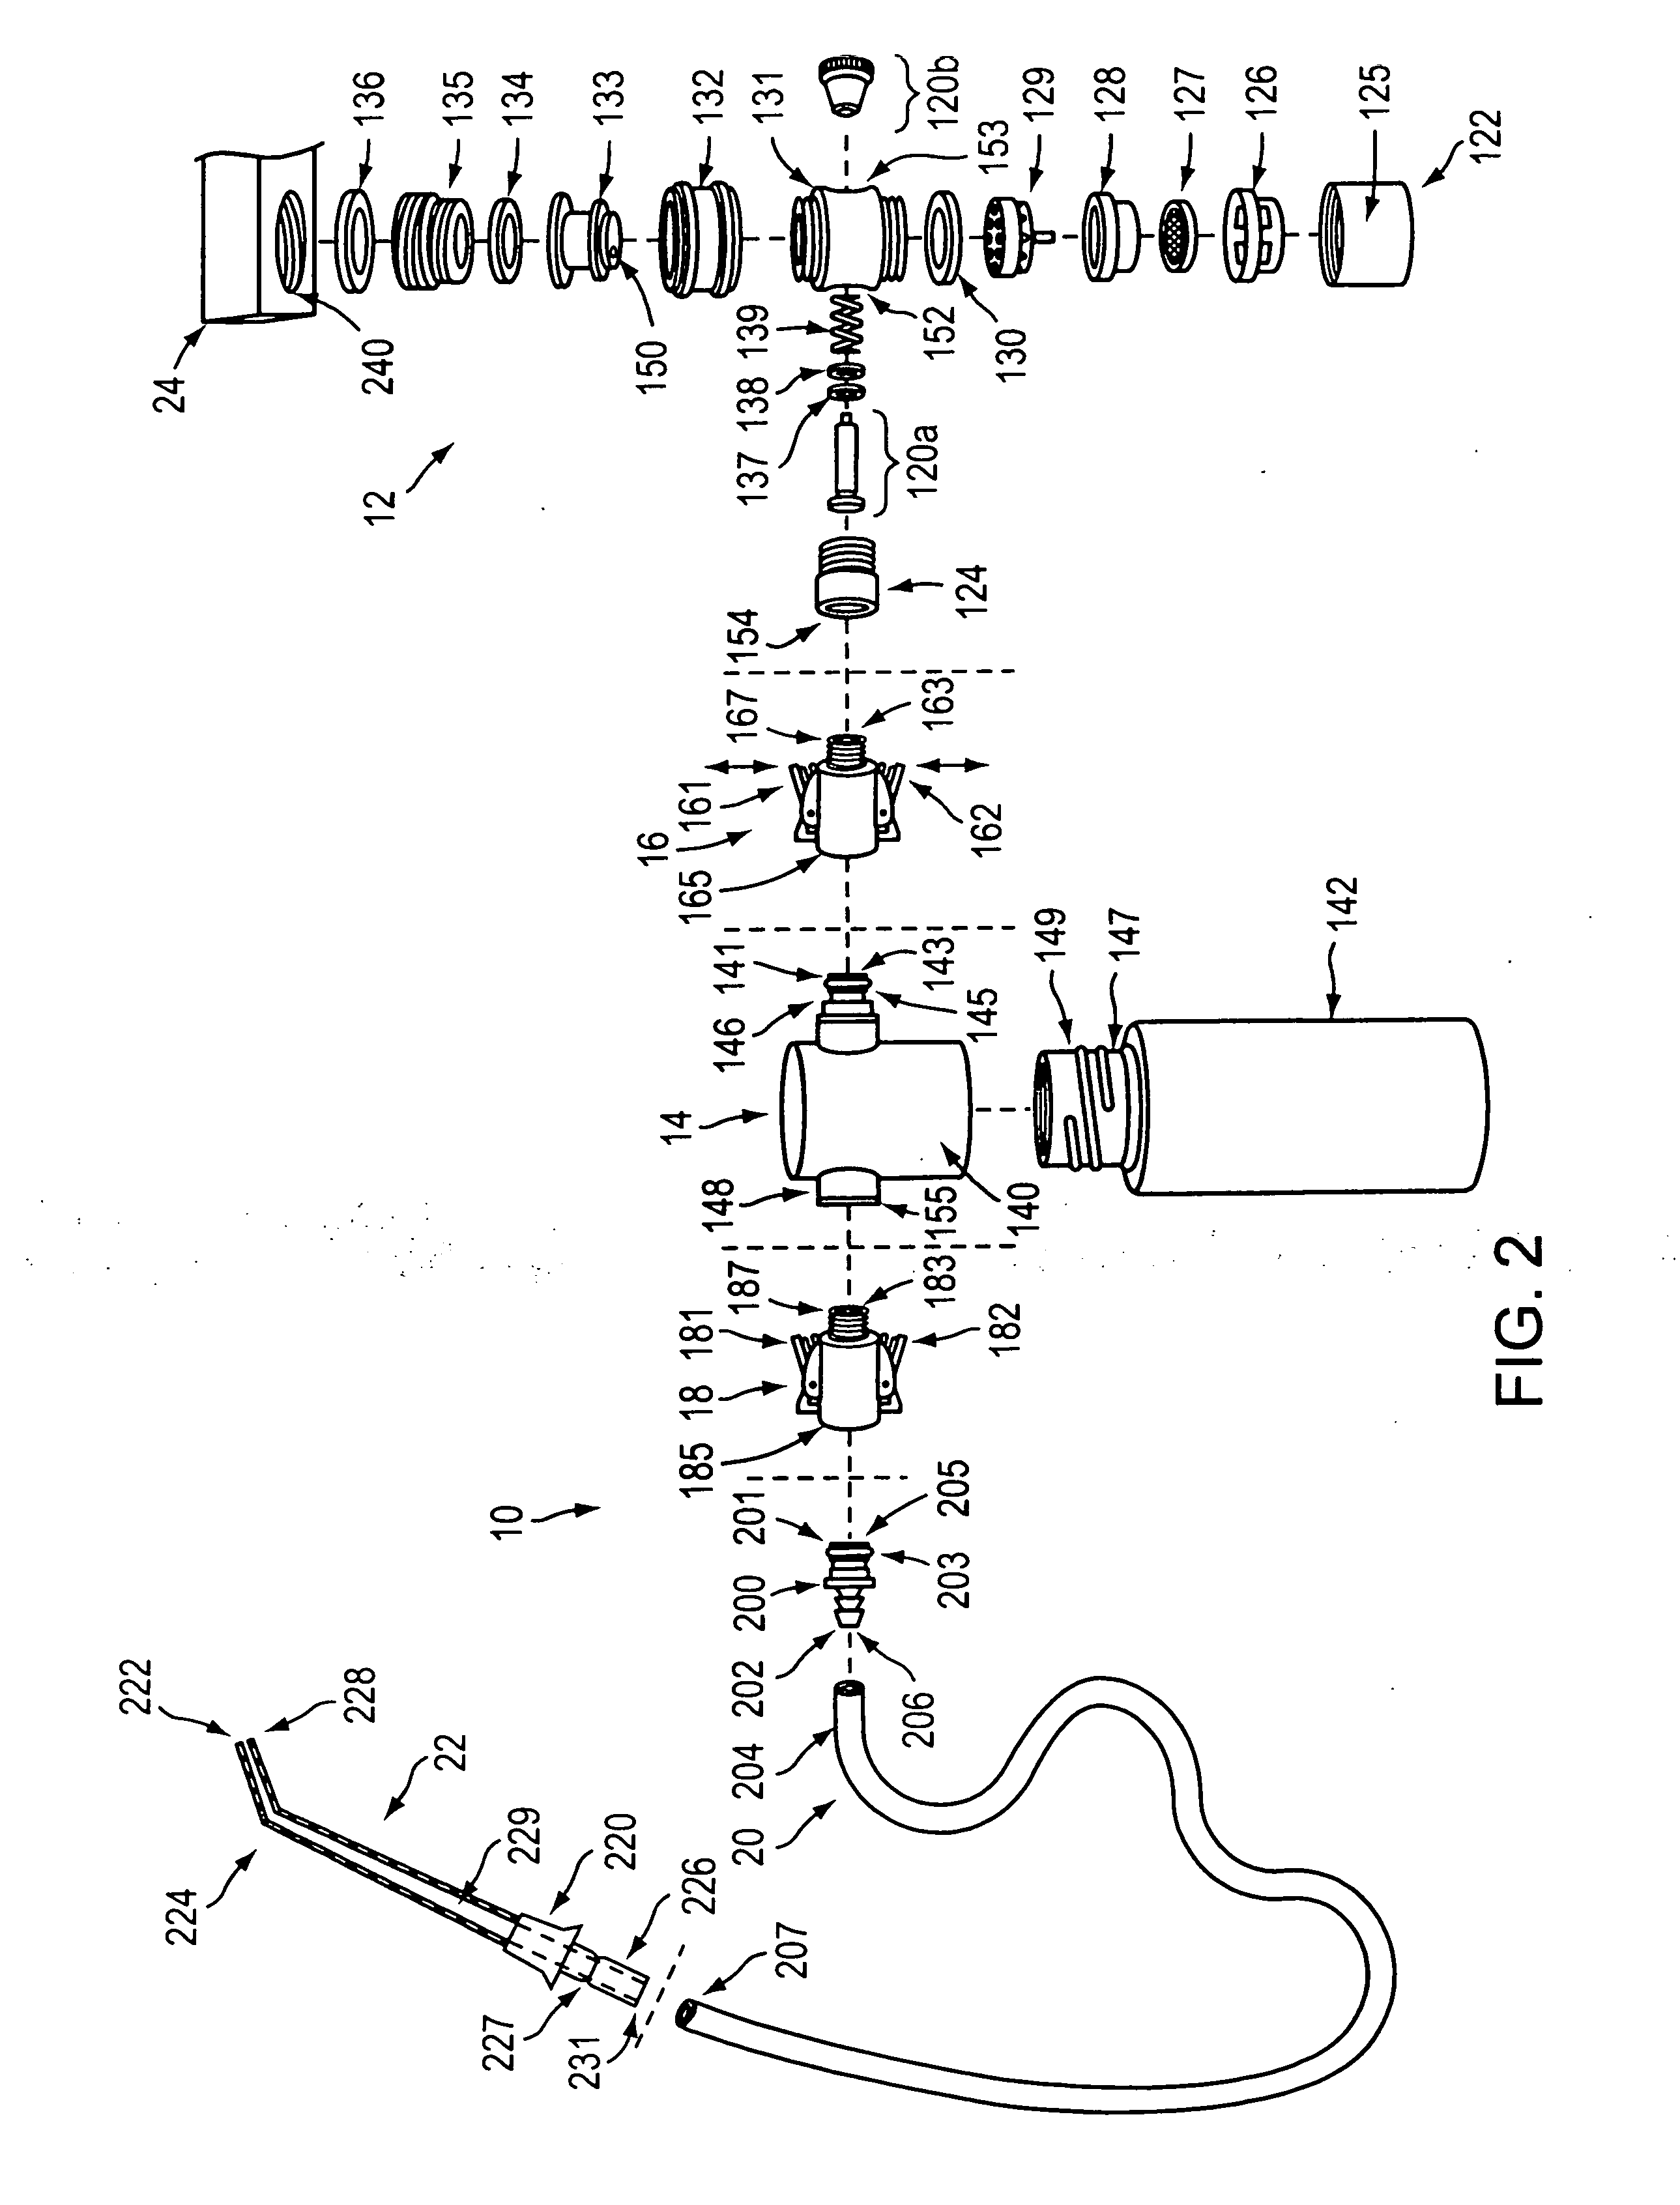 Coupling device for security coupling first and second elements